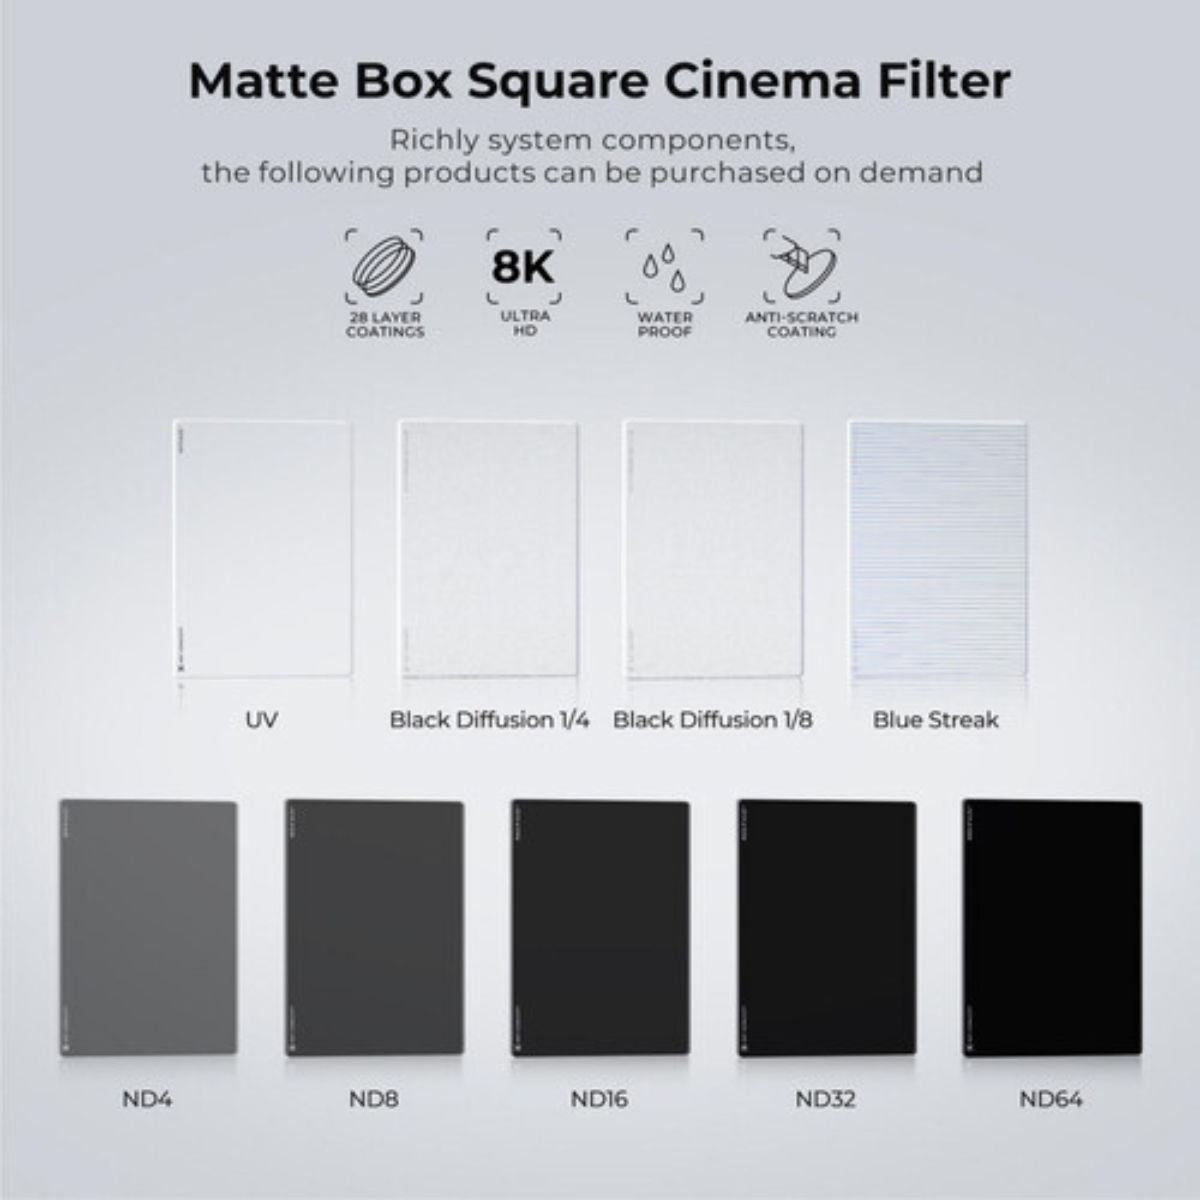 K&F Concept 4 x 5.65" Matte Box Cinema Camera Square Filter with Protective Leather Carry Storage Pouch - Choose from Black Mist 1/4, Black Mist 1/8, Blue Streak, MCUV, ND64, ND32, ND16, ND8